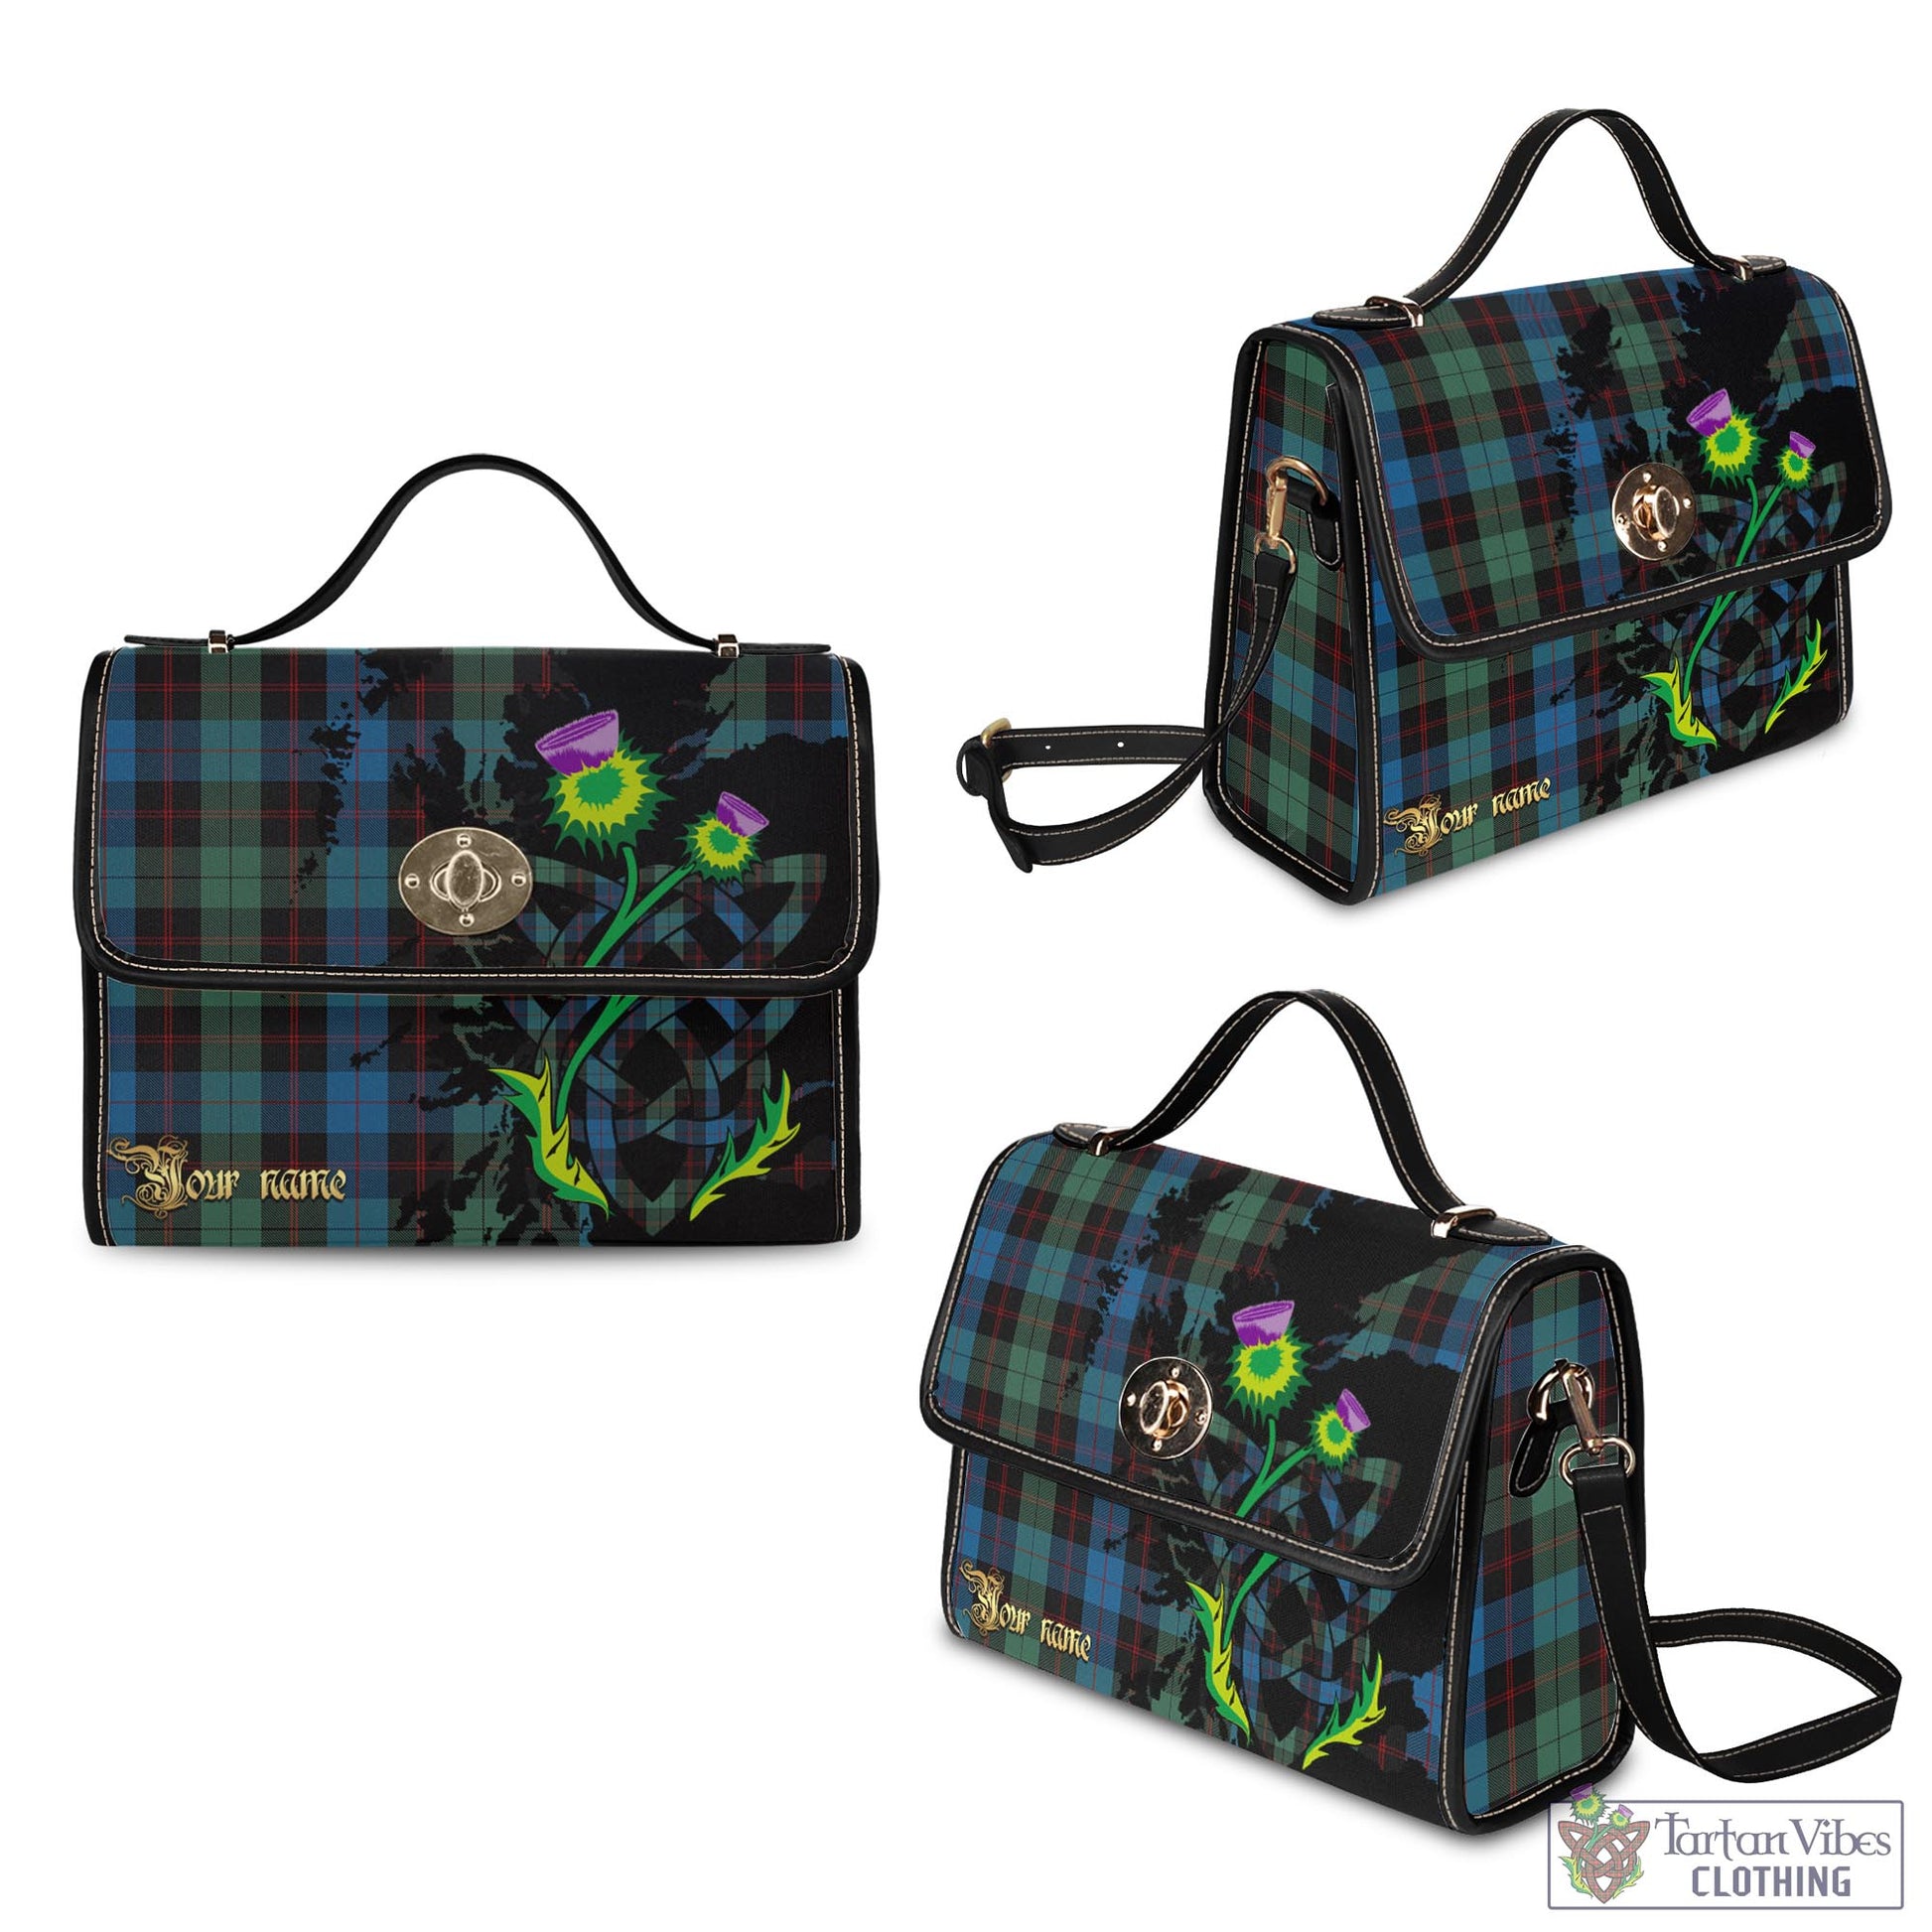 Tartan Vibes Clothing Guthrie Tartan Waterproof Canvas Bag with Scotland Map and Thistle Celtic Accents